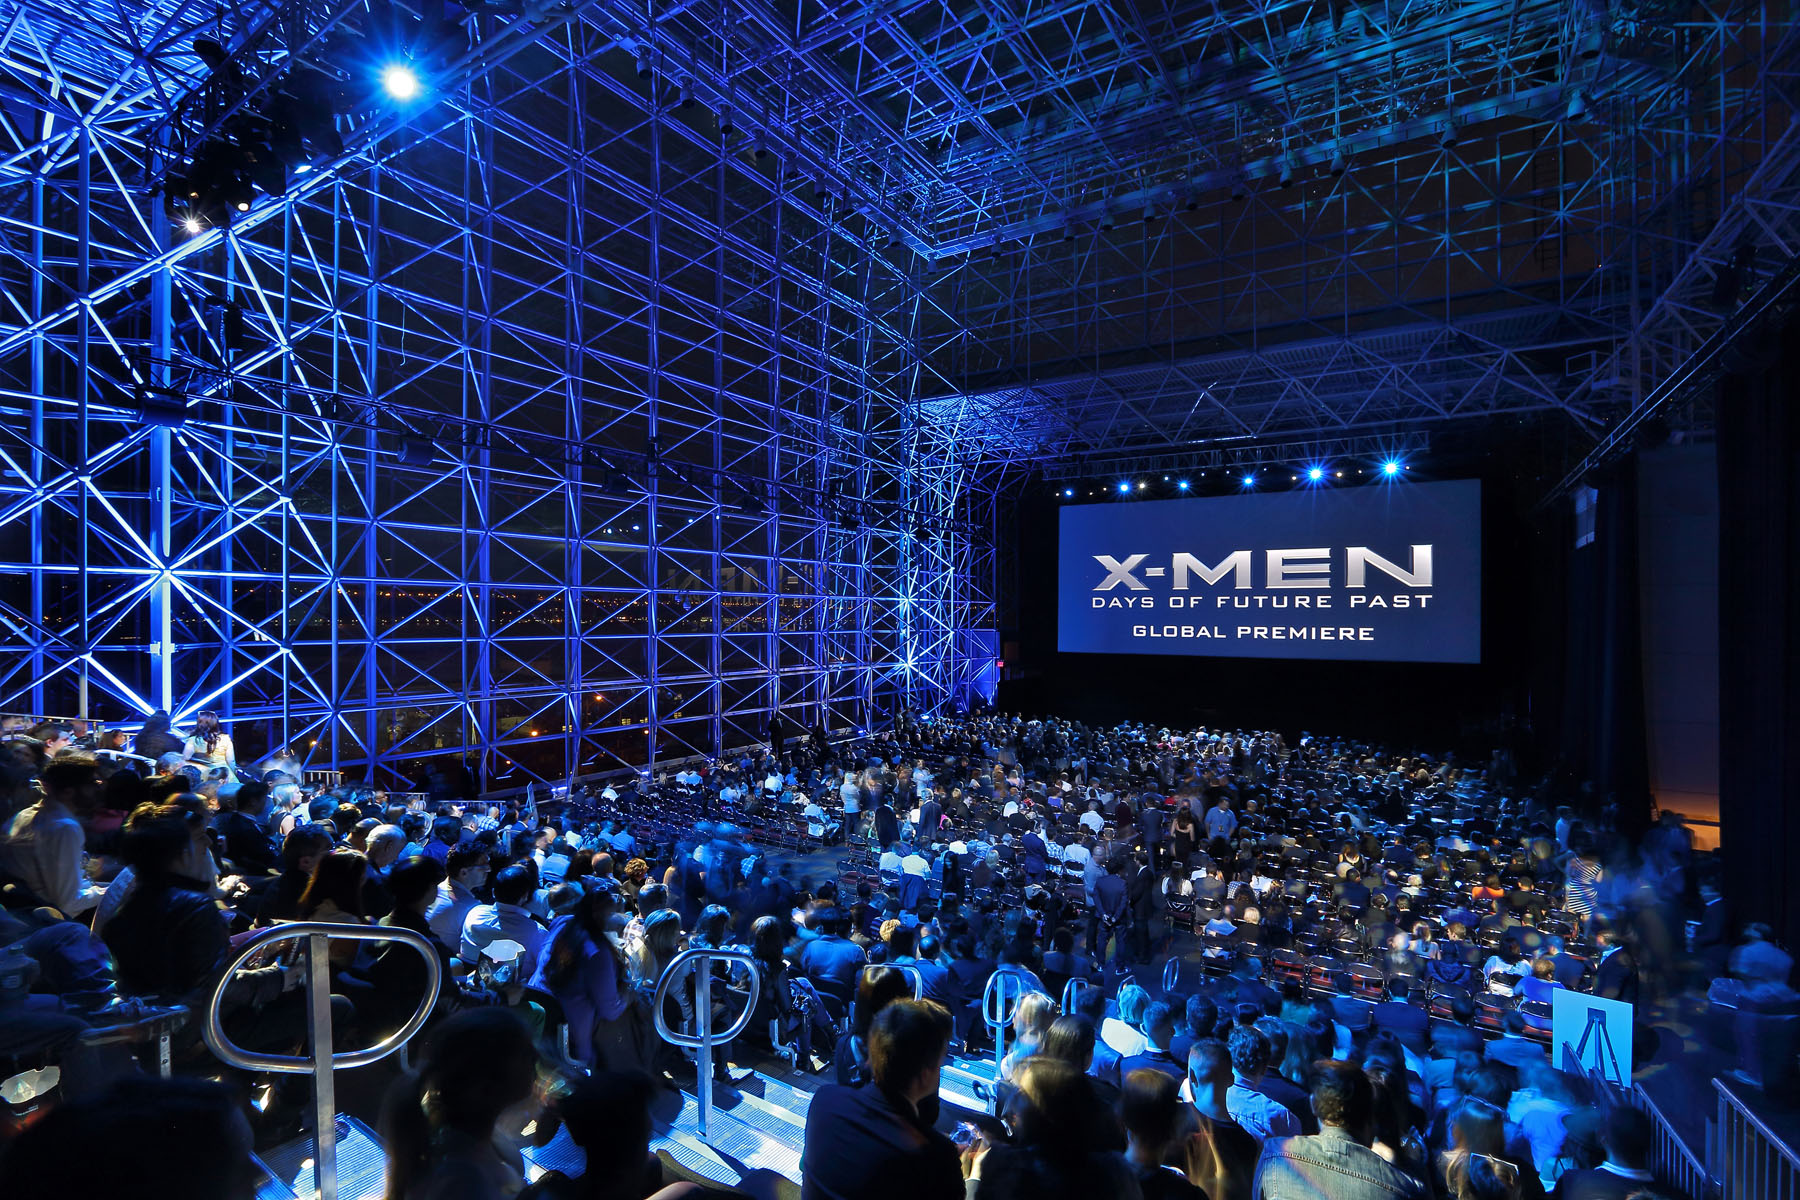 K2 sound system set up by L-Acoustics at the World Premiere of X-Men: Days of Future Past